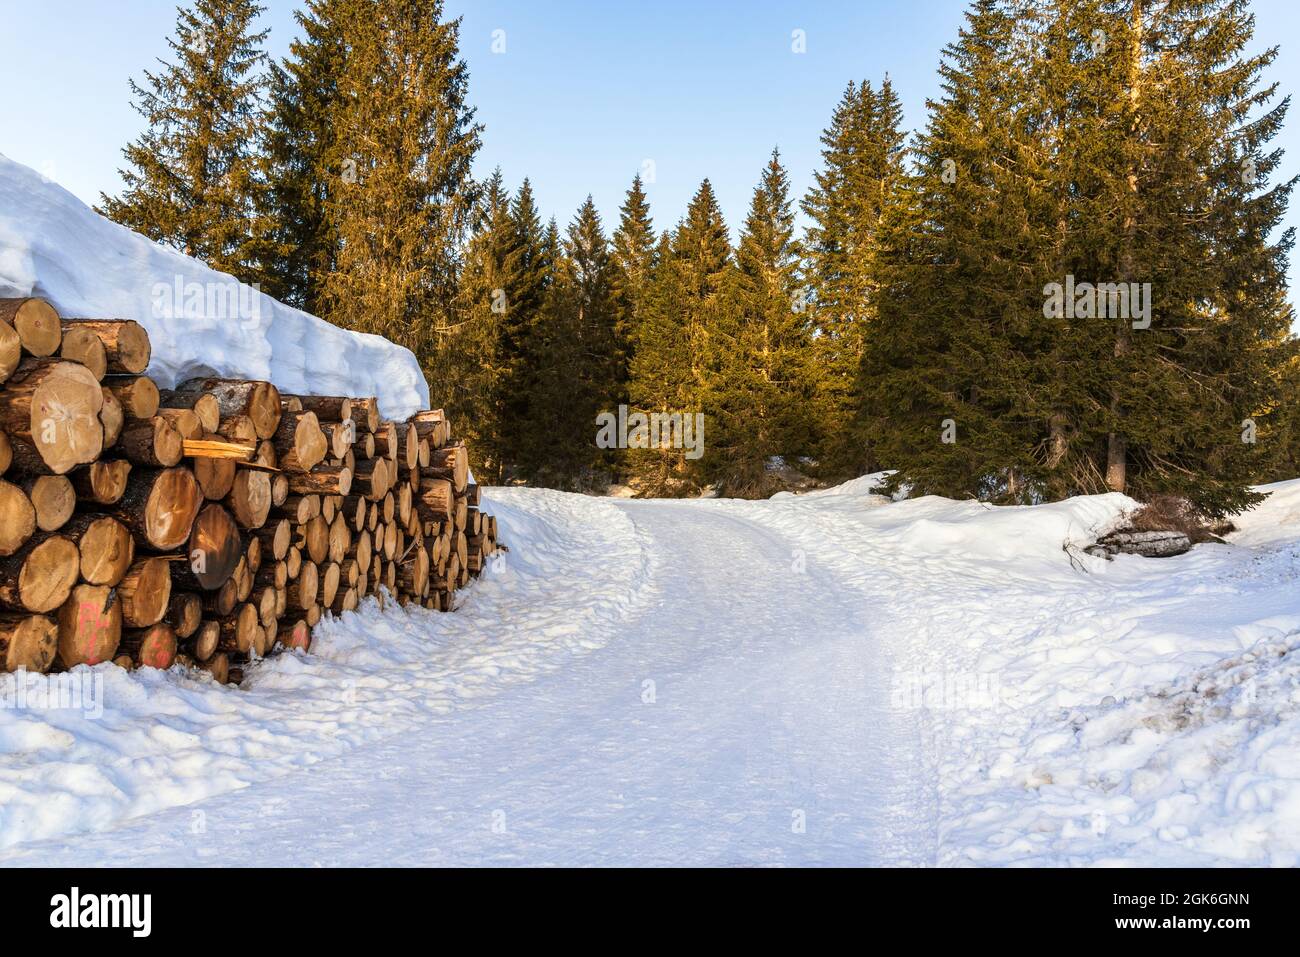 Snow covered stack of logs for timber industry along a narrow snowy road through a pine forest in the mountains at sunset Stock Photo